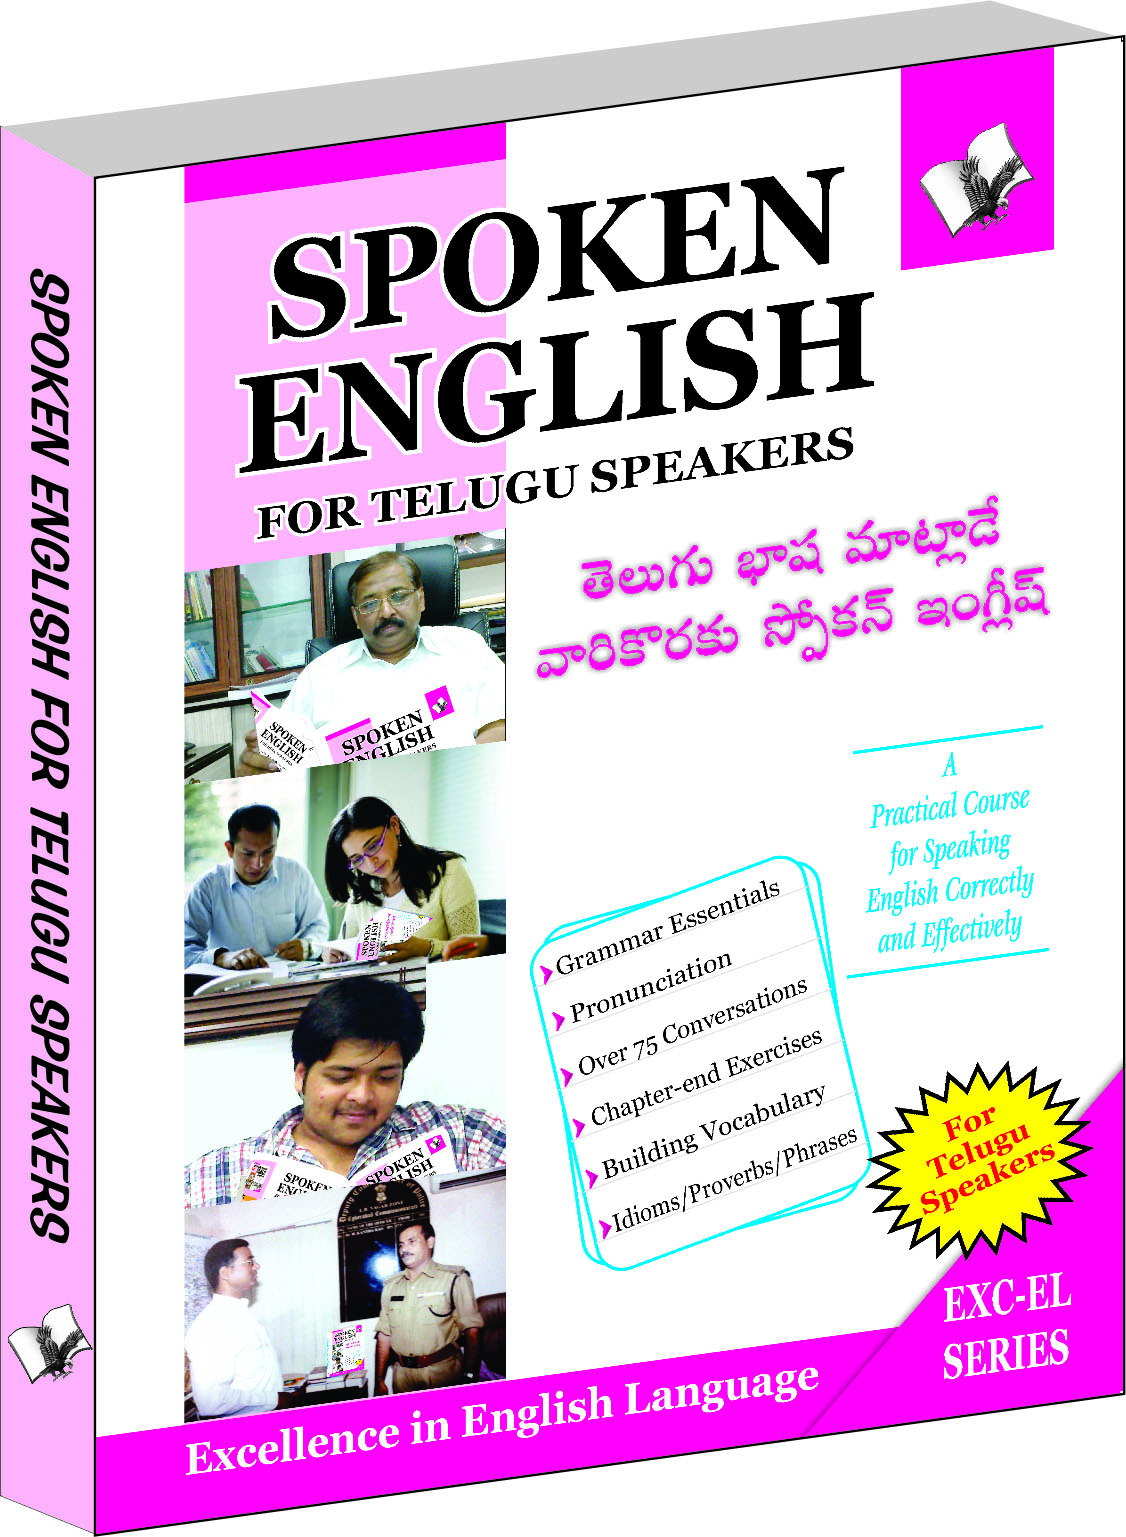 Spoken English For Telugu Speakers-How to convey your ideas in English at home, market & business for Telugu speakers